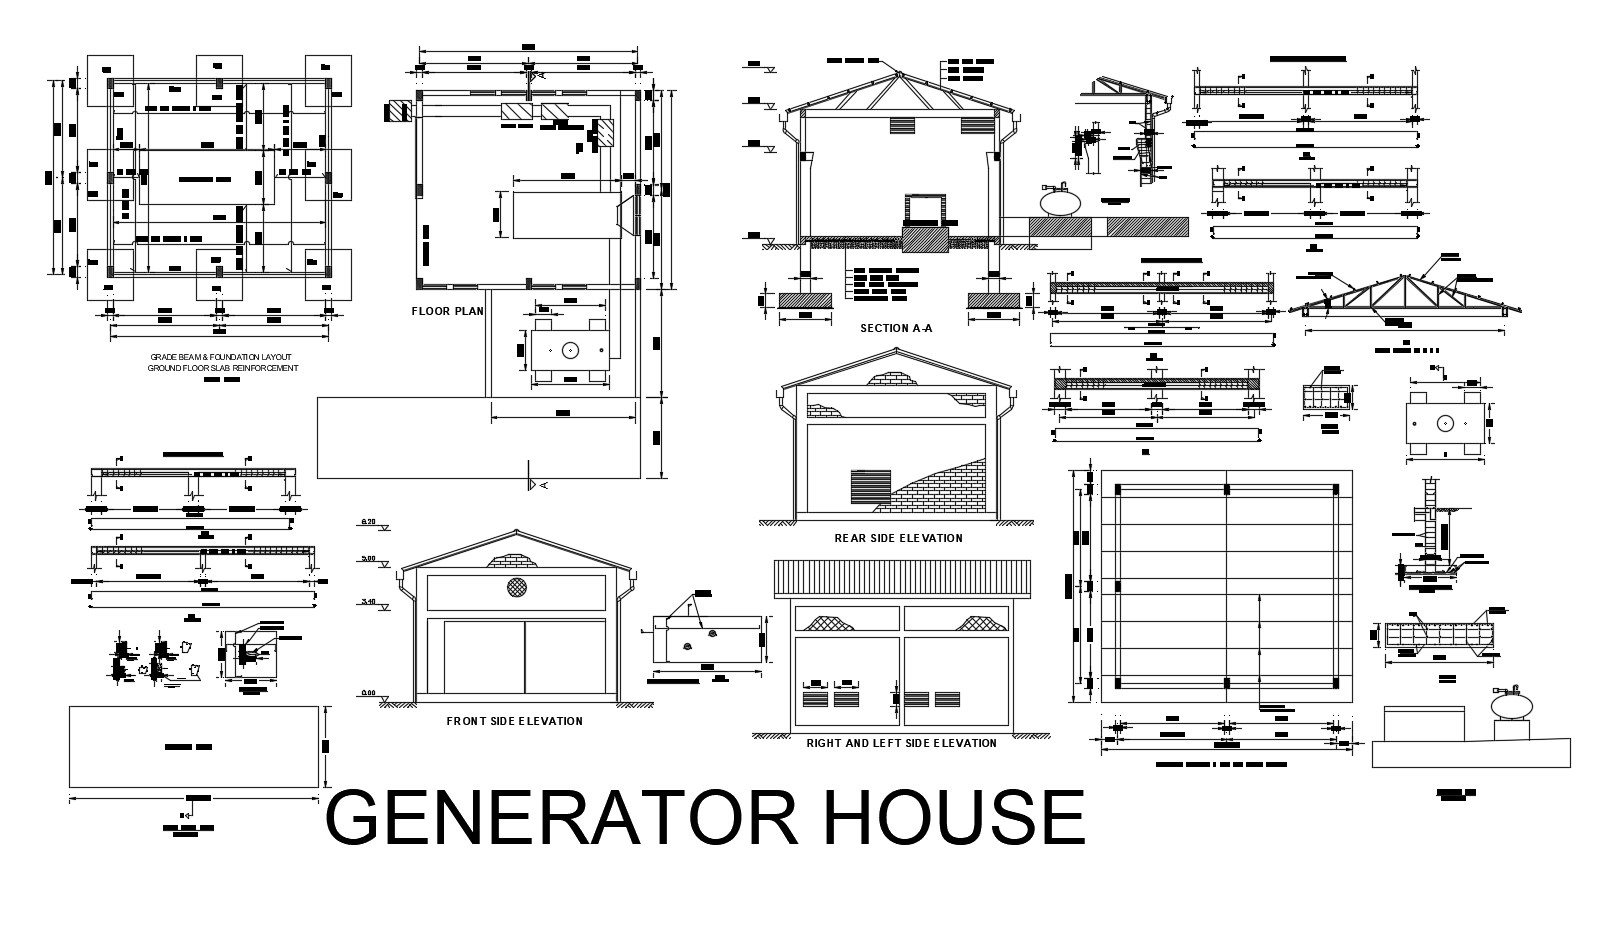 Generator house design 8.10mtr x 7.04mtr with elevation and section in